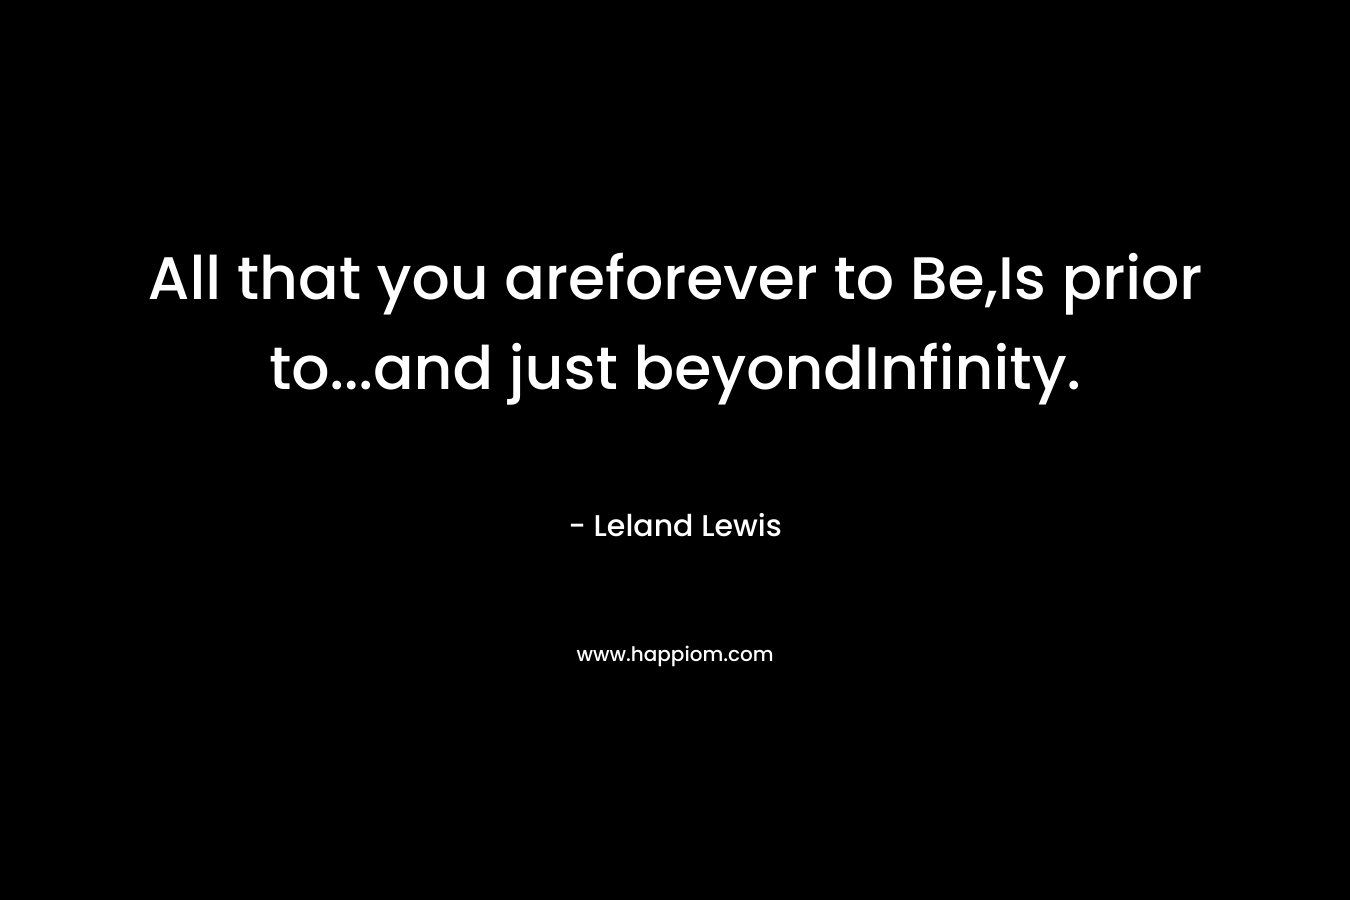 All that you areforever to Be,Is prior to...and just beyondInfinity.